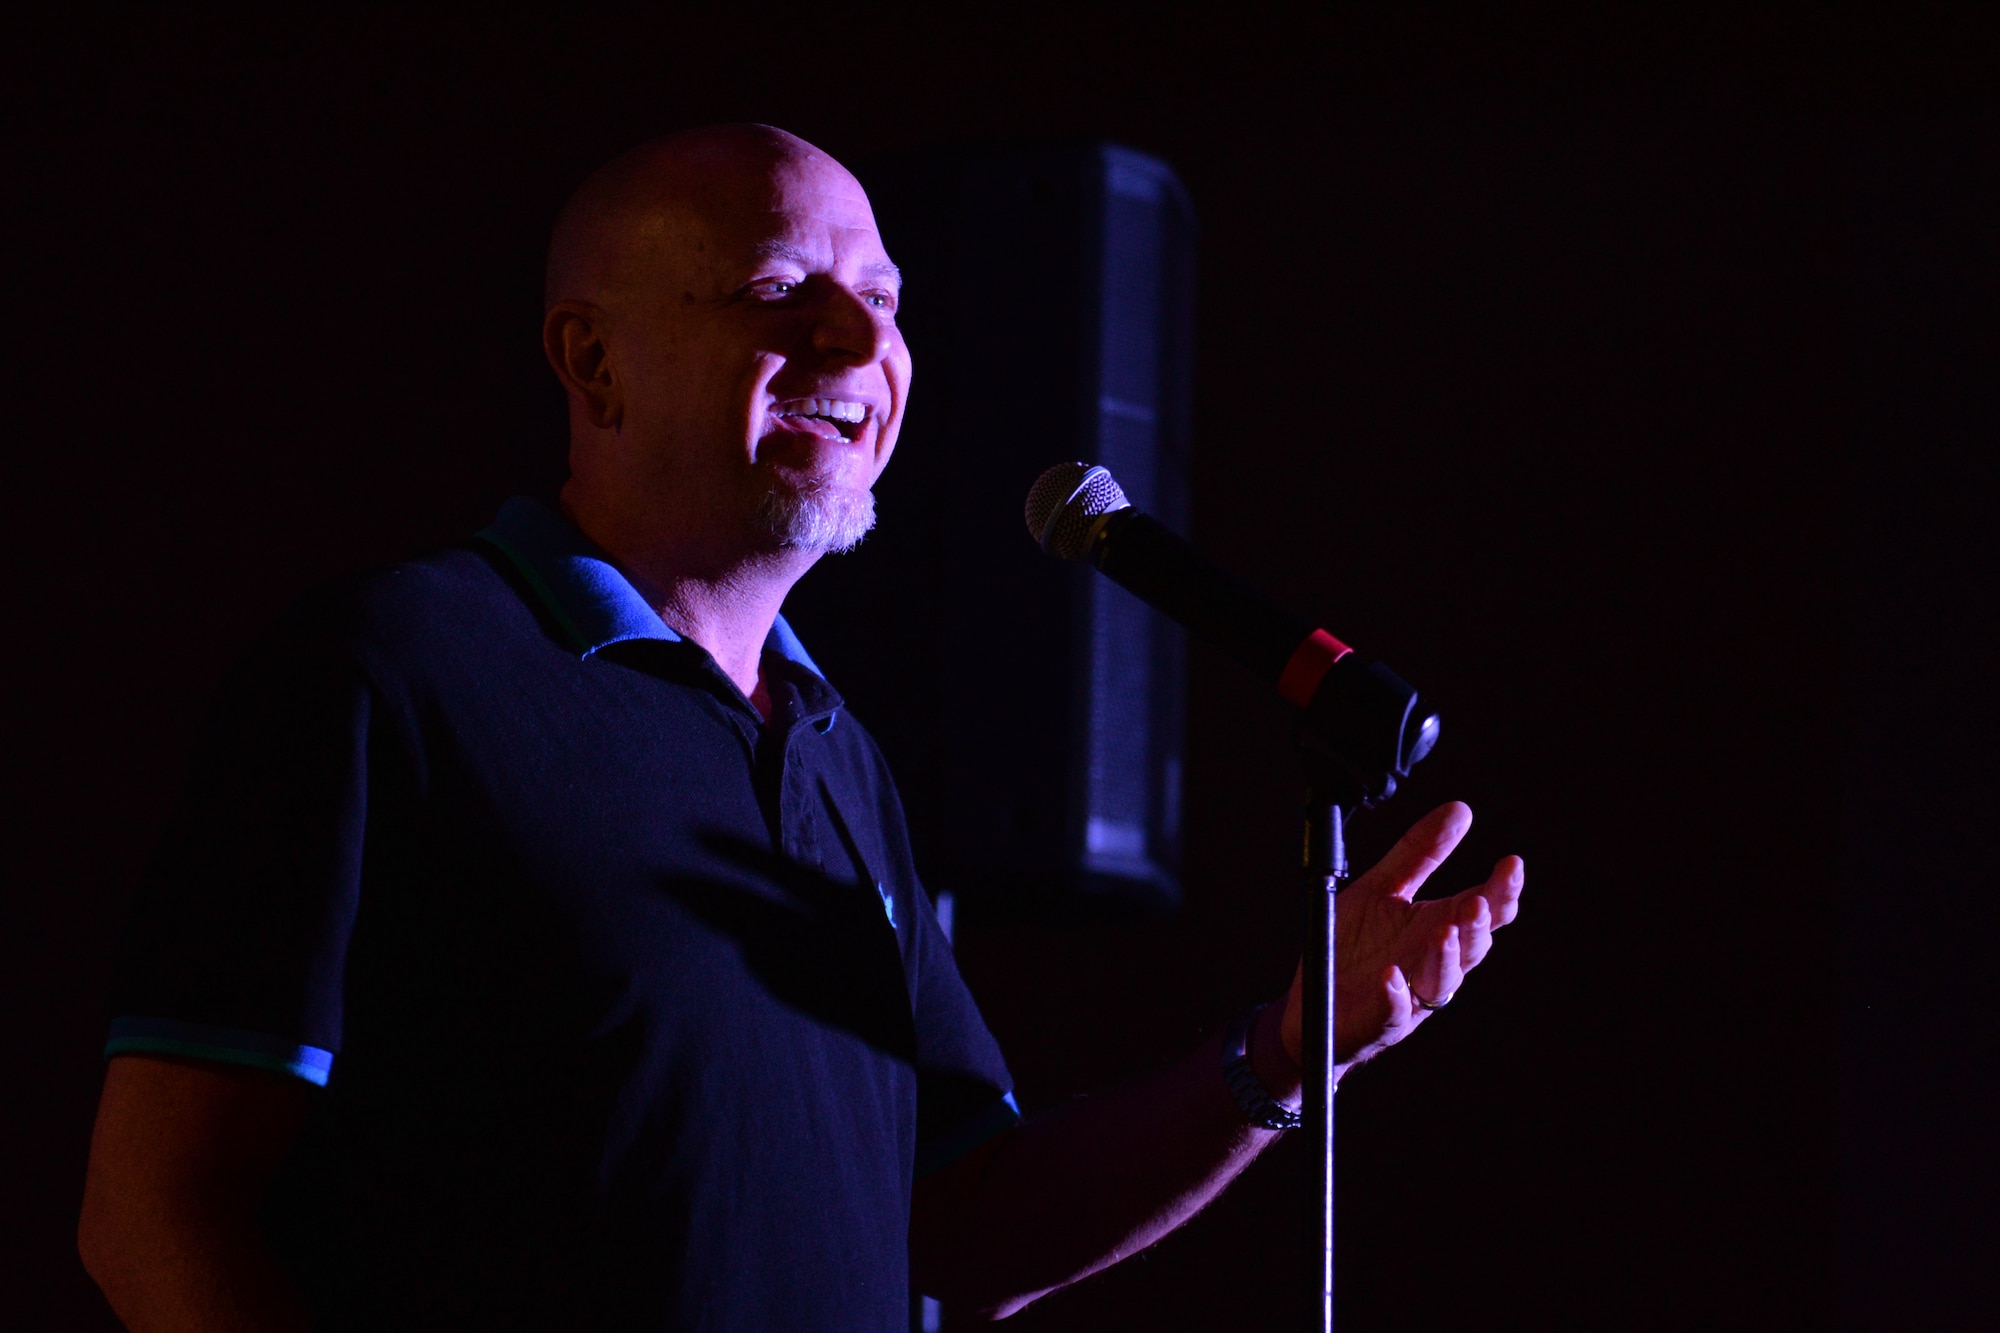 Don Barnhart, a stand-up comedian, tells a story to more than 70 service members and their families Oct. 21, 2015, at Andersen Air Force Base, Guam. Barnhart is part of an Armed Forces Entertainment-sponsored comedy group touring military installations to improve morale and bring laughter to the troops. (U.S. Air Force photo by Airman 1st Class Alexa Ann Henderson/Released)